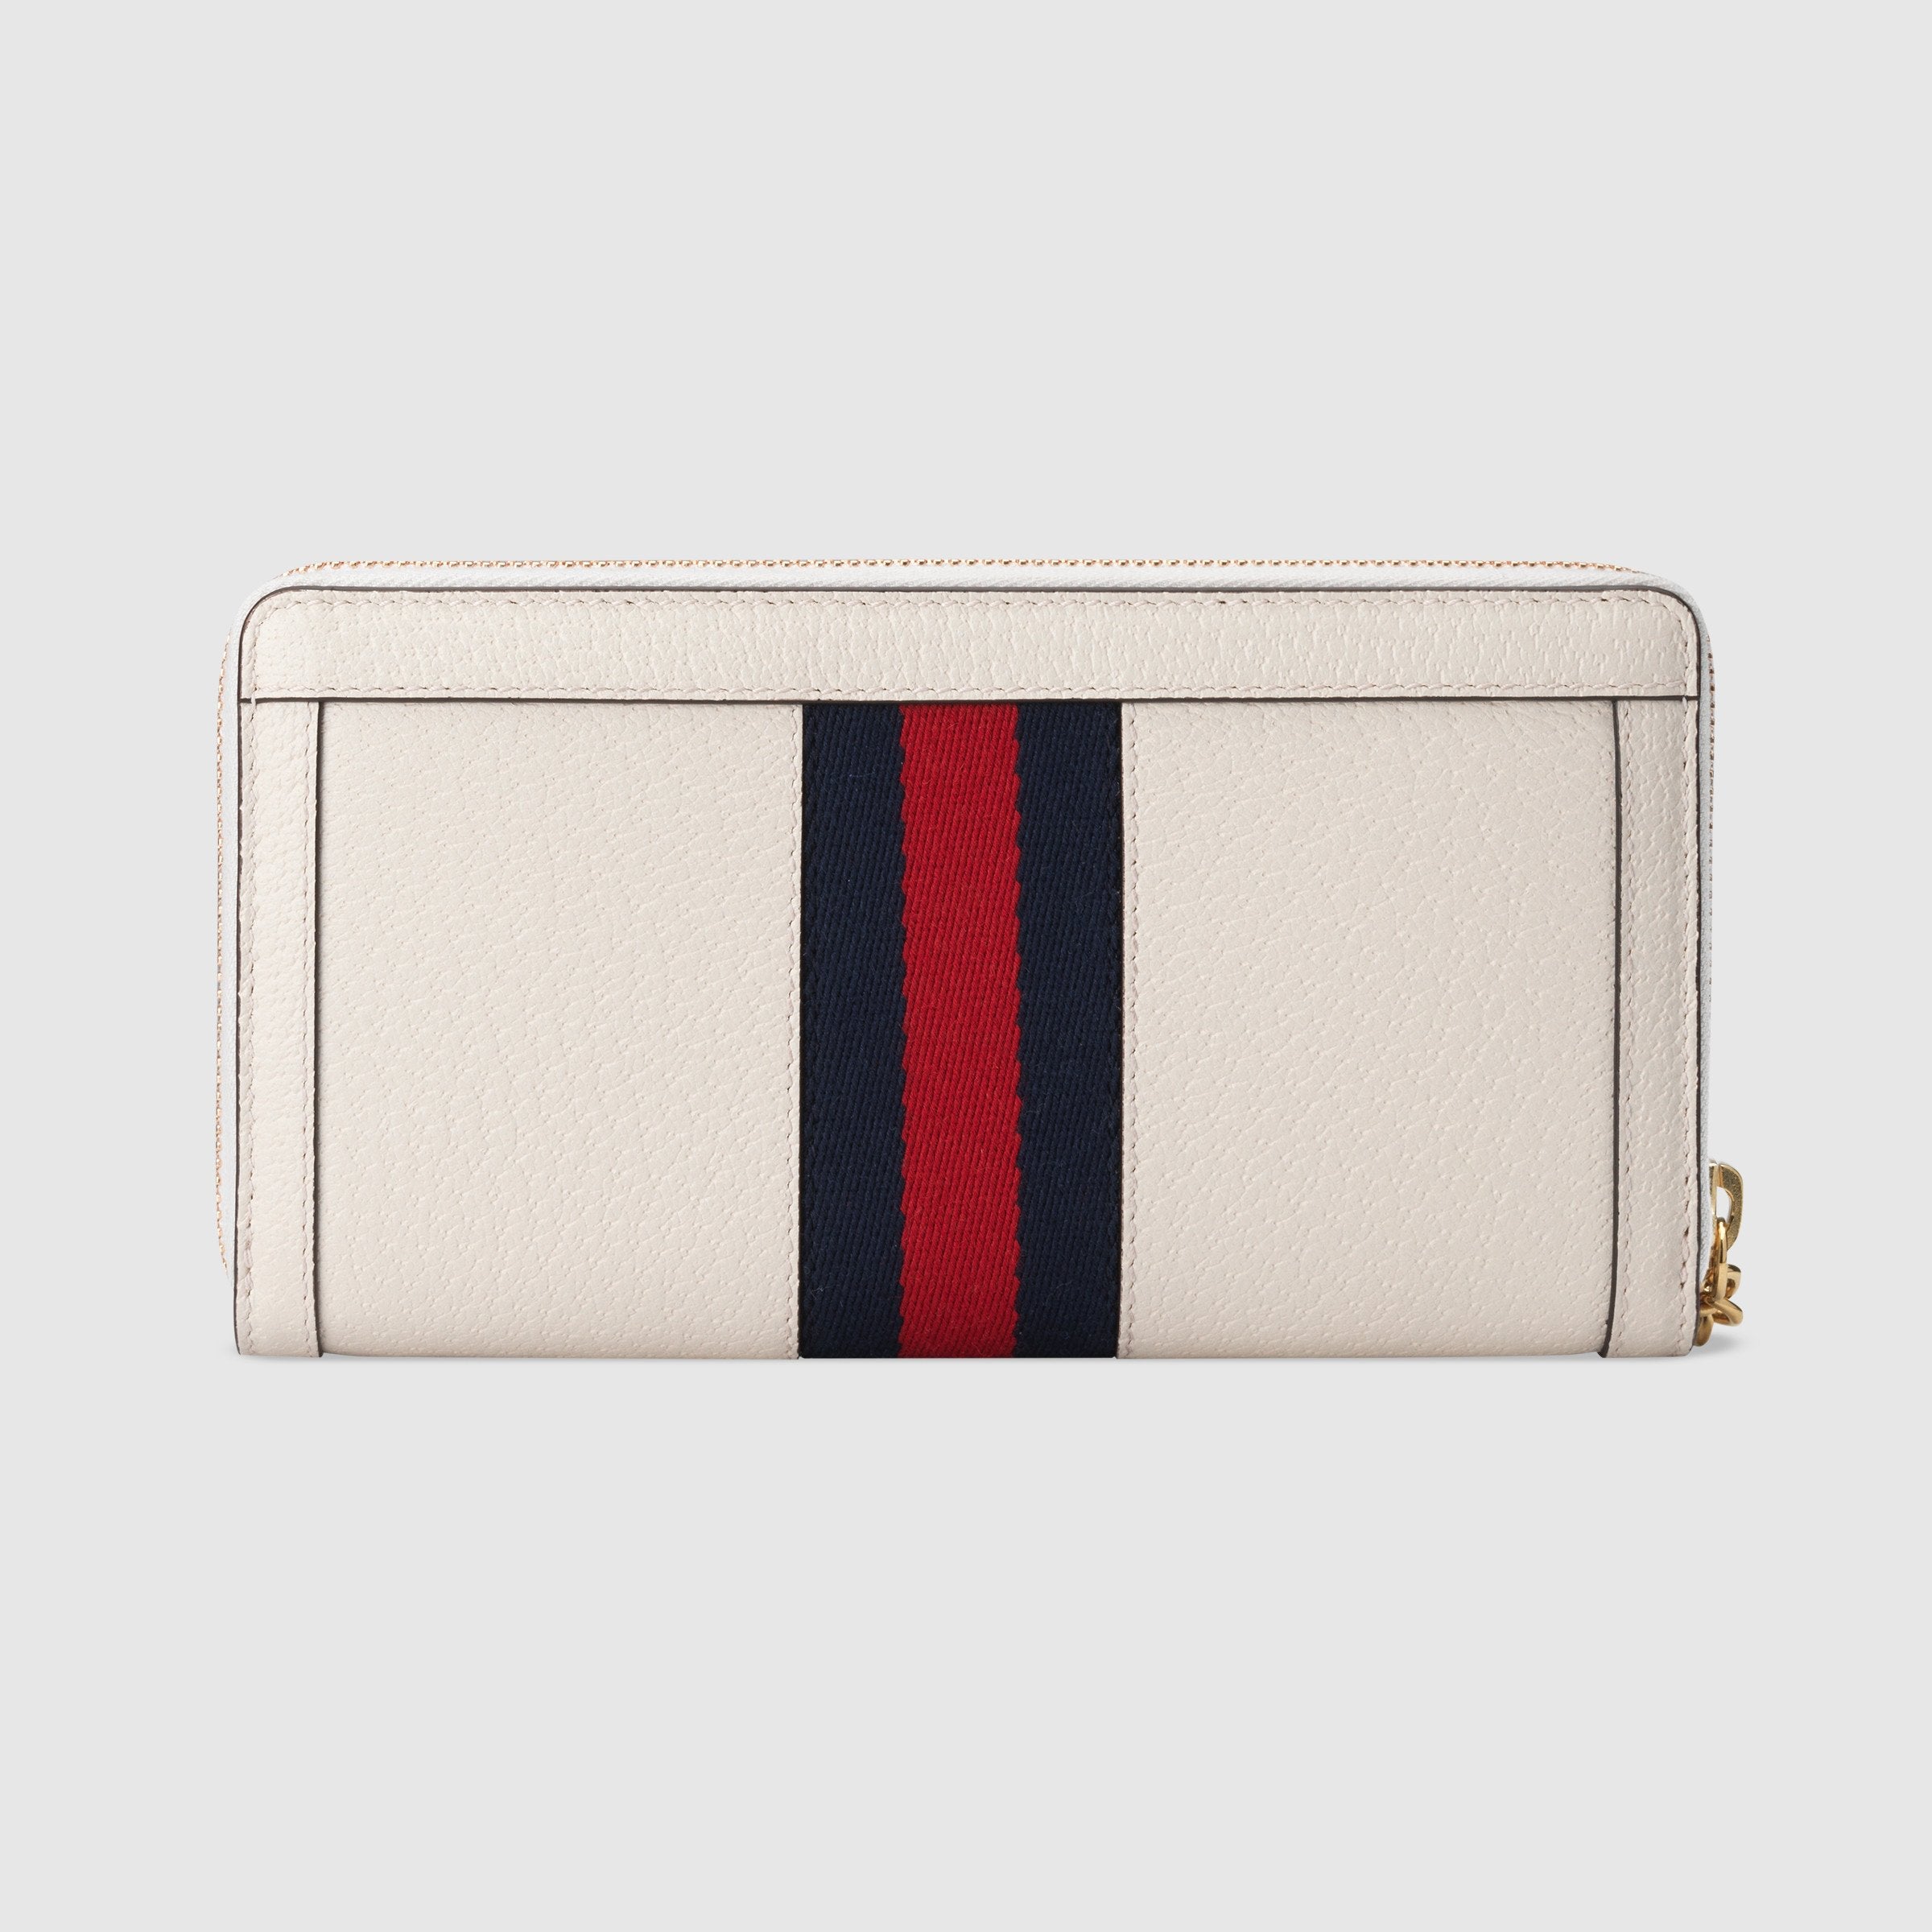 Gucci Ophidia Zip Around Wallet White Leather